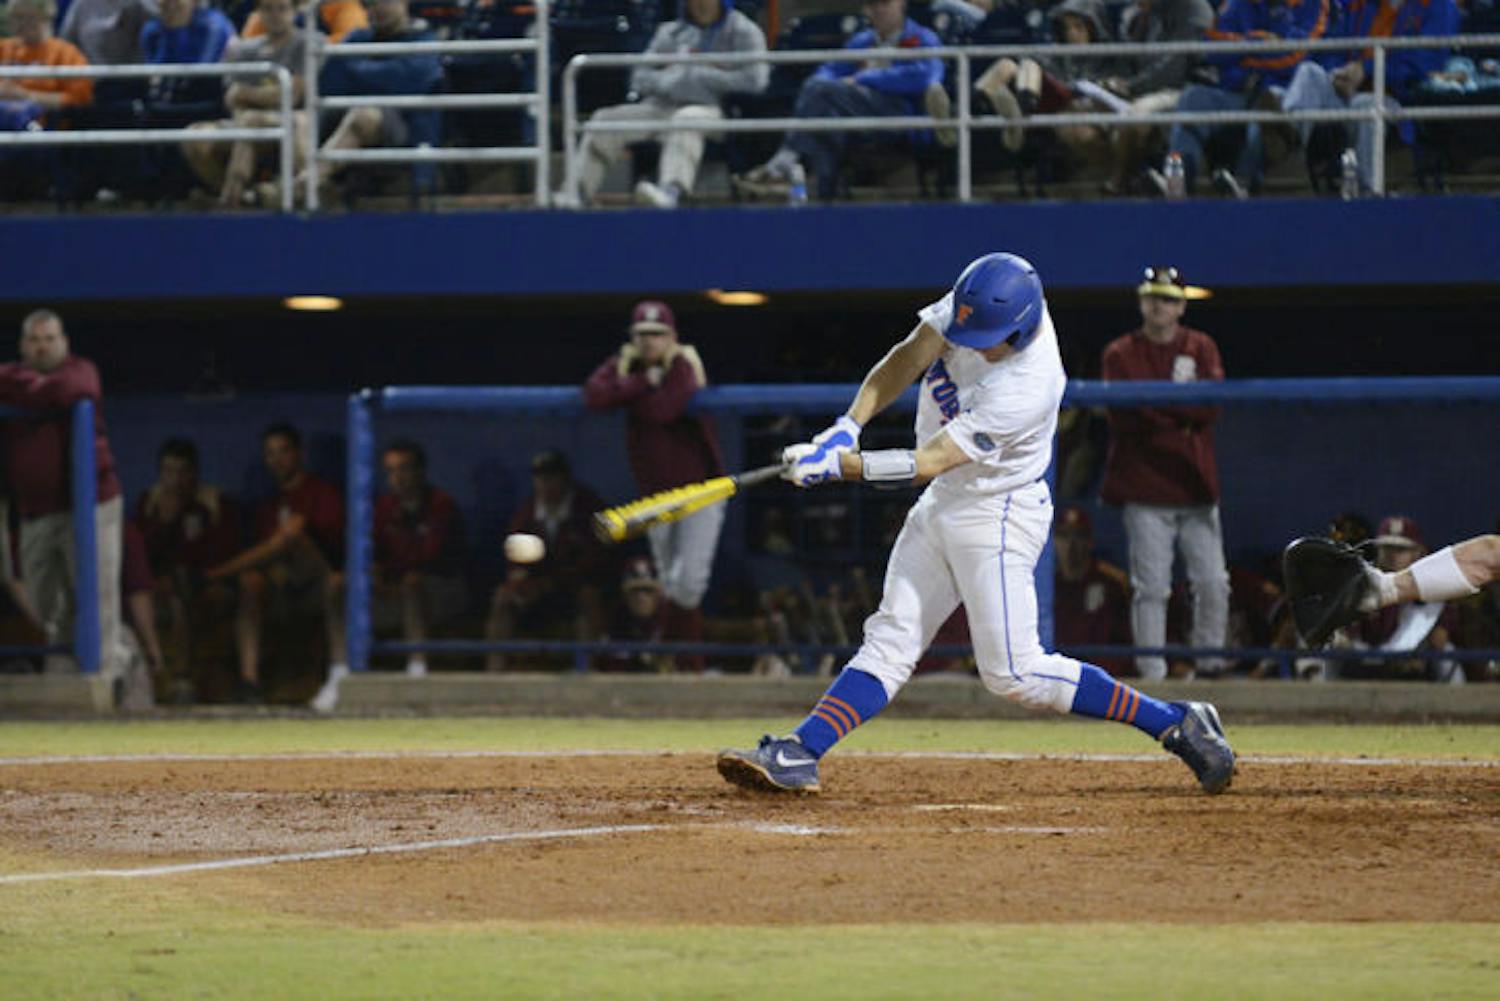 Catcher Taylor Gushue swings during Florida’s 4-1 loss to Florida State on March 12, 2013 at McKethan Stadium. Gushue had a career high four hits, three singles and a double, on Friday against Miami.